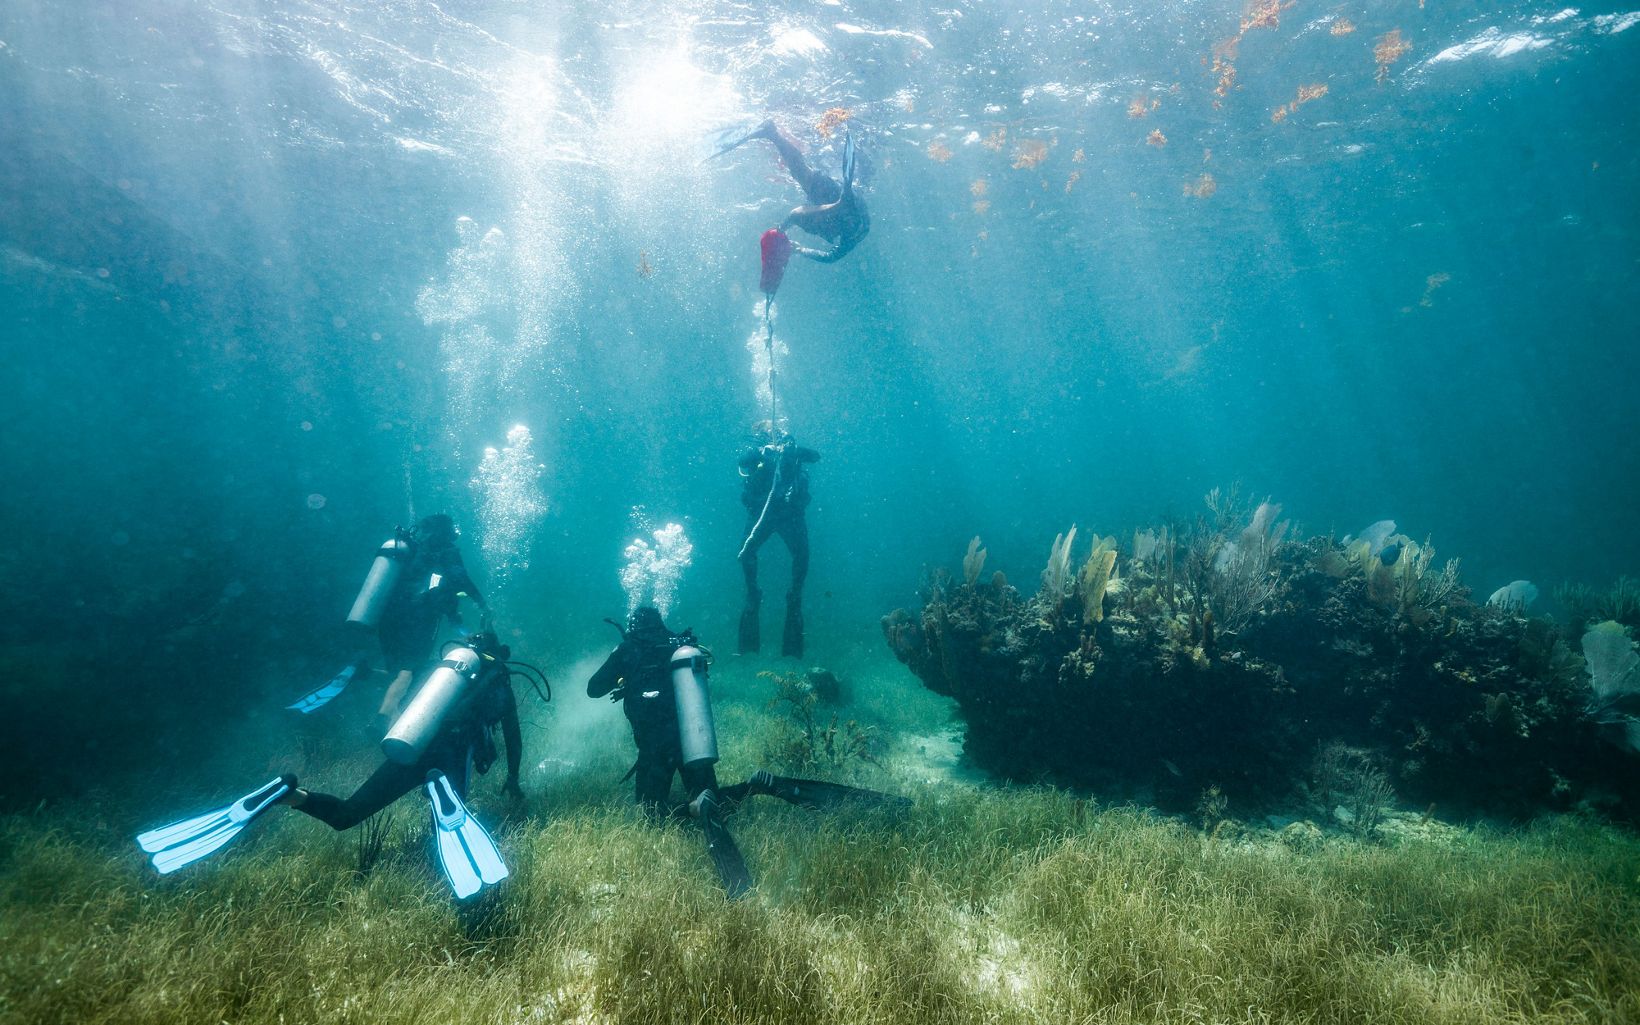 During the second day of coral reef rapid-response training for natural disasters, brigade members practice with life bags, and also practice coral transplanting, cementing, and drilling. Brigade members work together to complete activities. In the Mesoamerican Barrier Reef  at Puerto Morelos Reef National Park.  Puerto Morelos, Mexico. June 2018.       